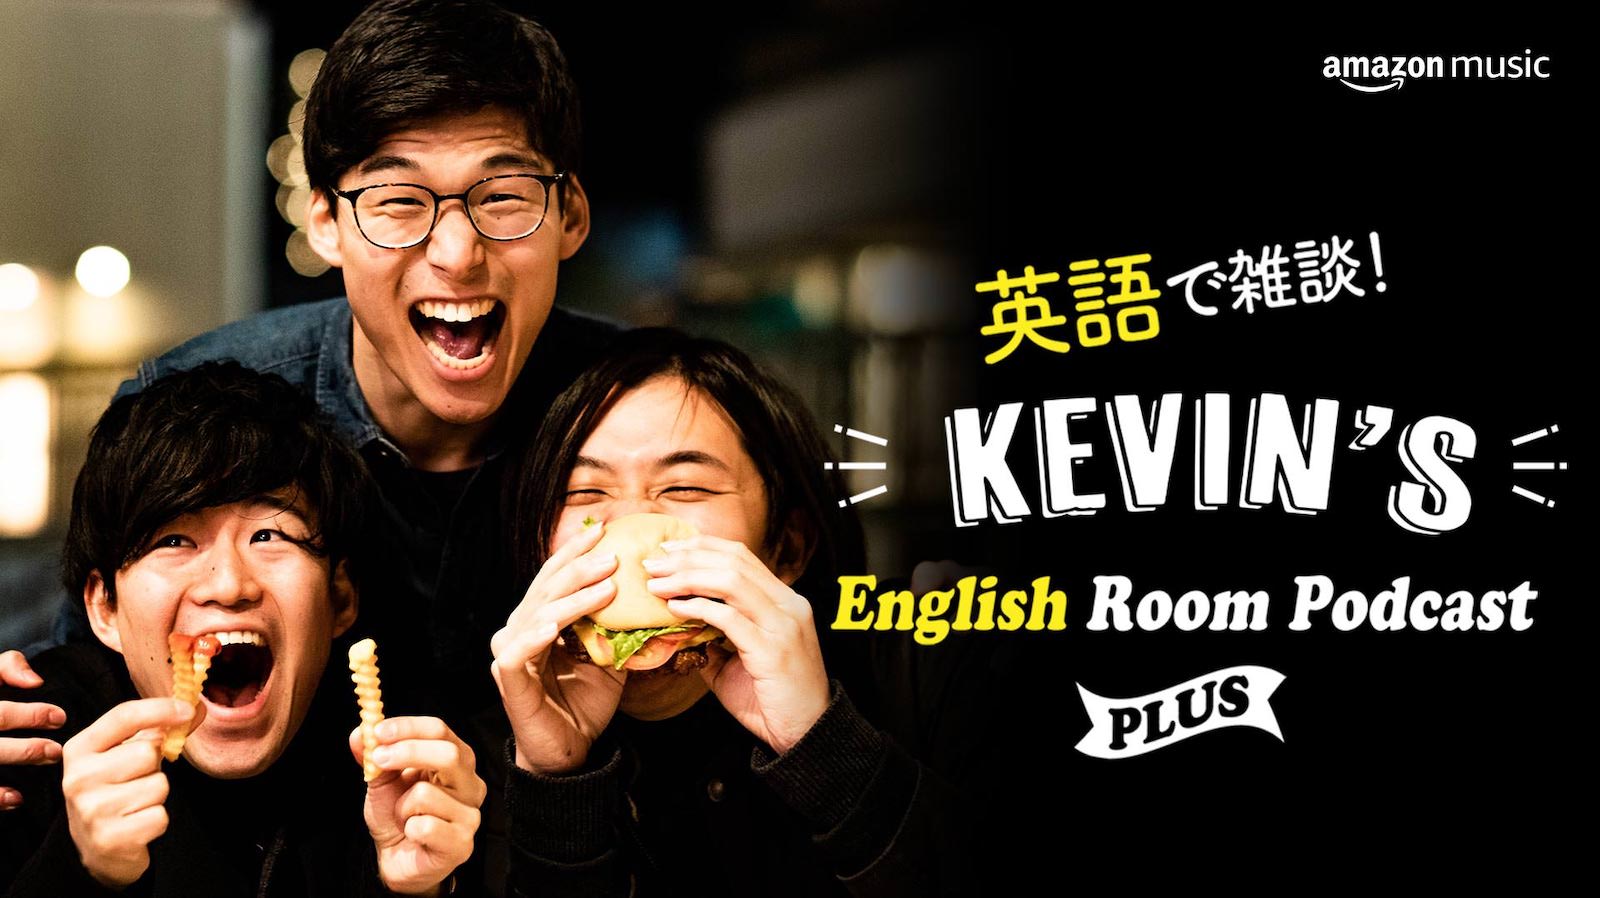 Kevins English Room Podcast 1